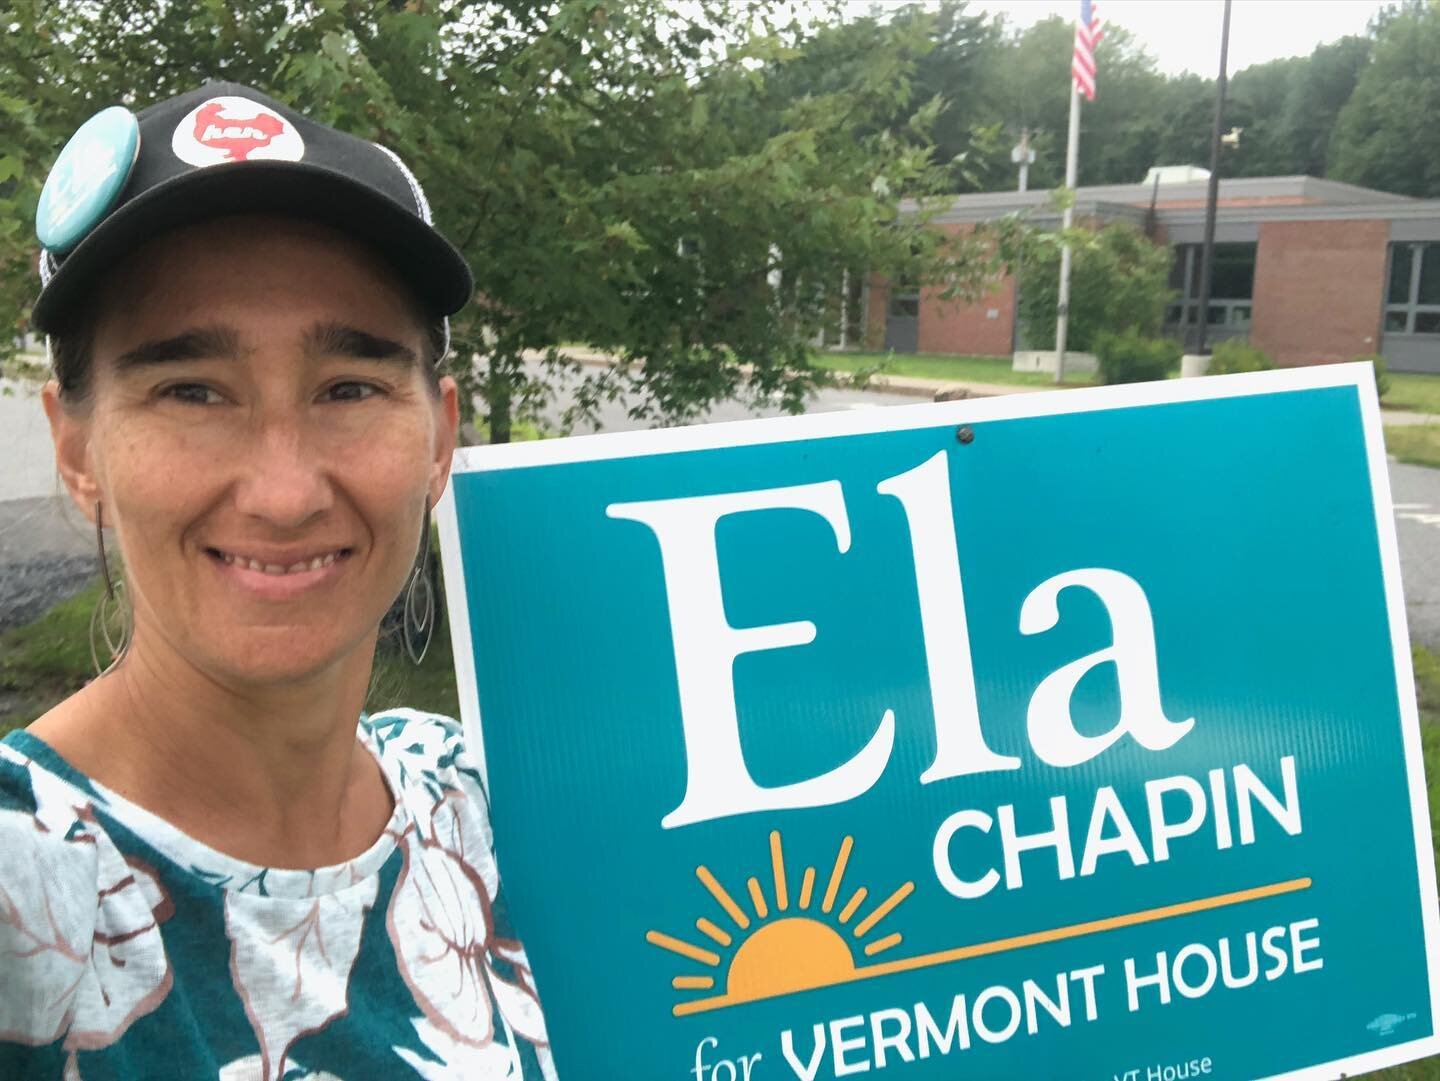 Up and at the polls! Thank you voters and good luck to all the candidates! #vtpoli #democraticprimary #elachapinvt